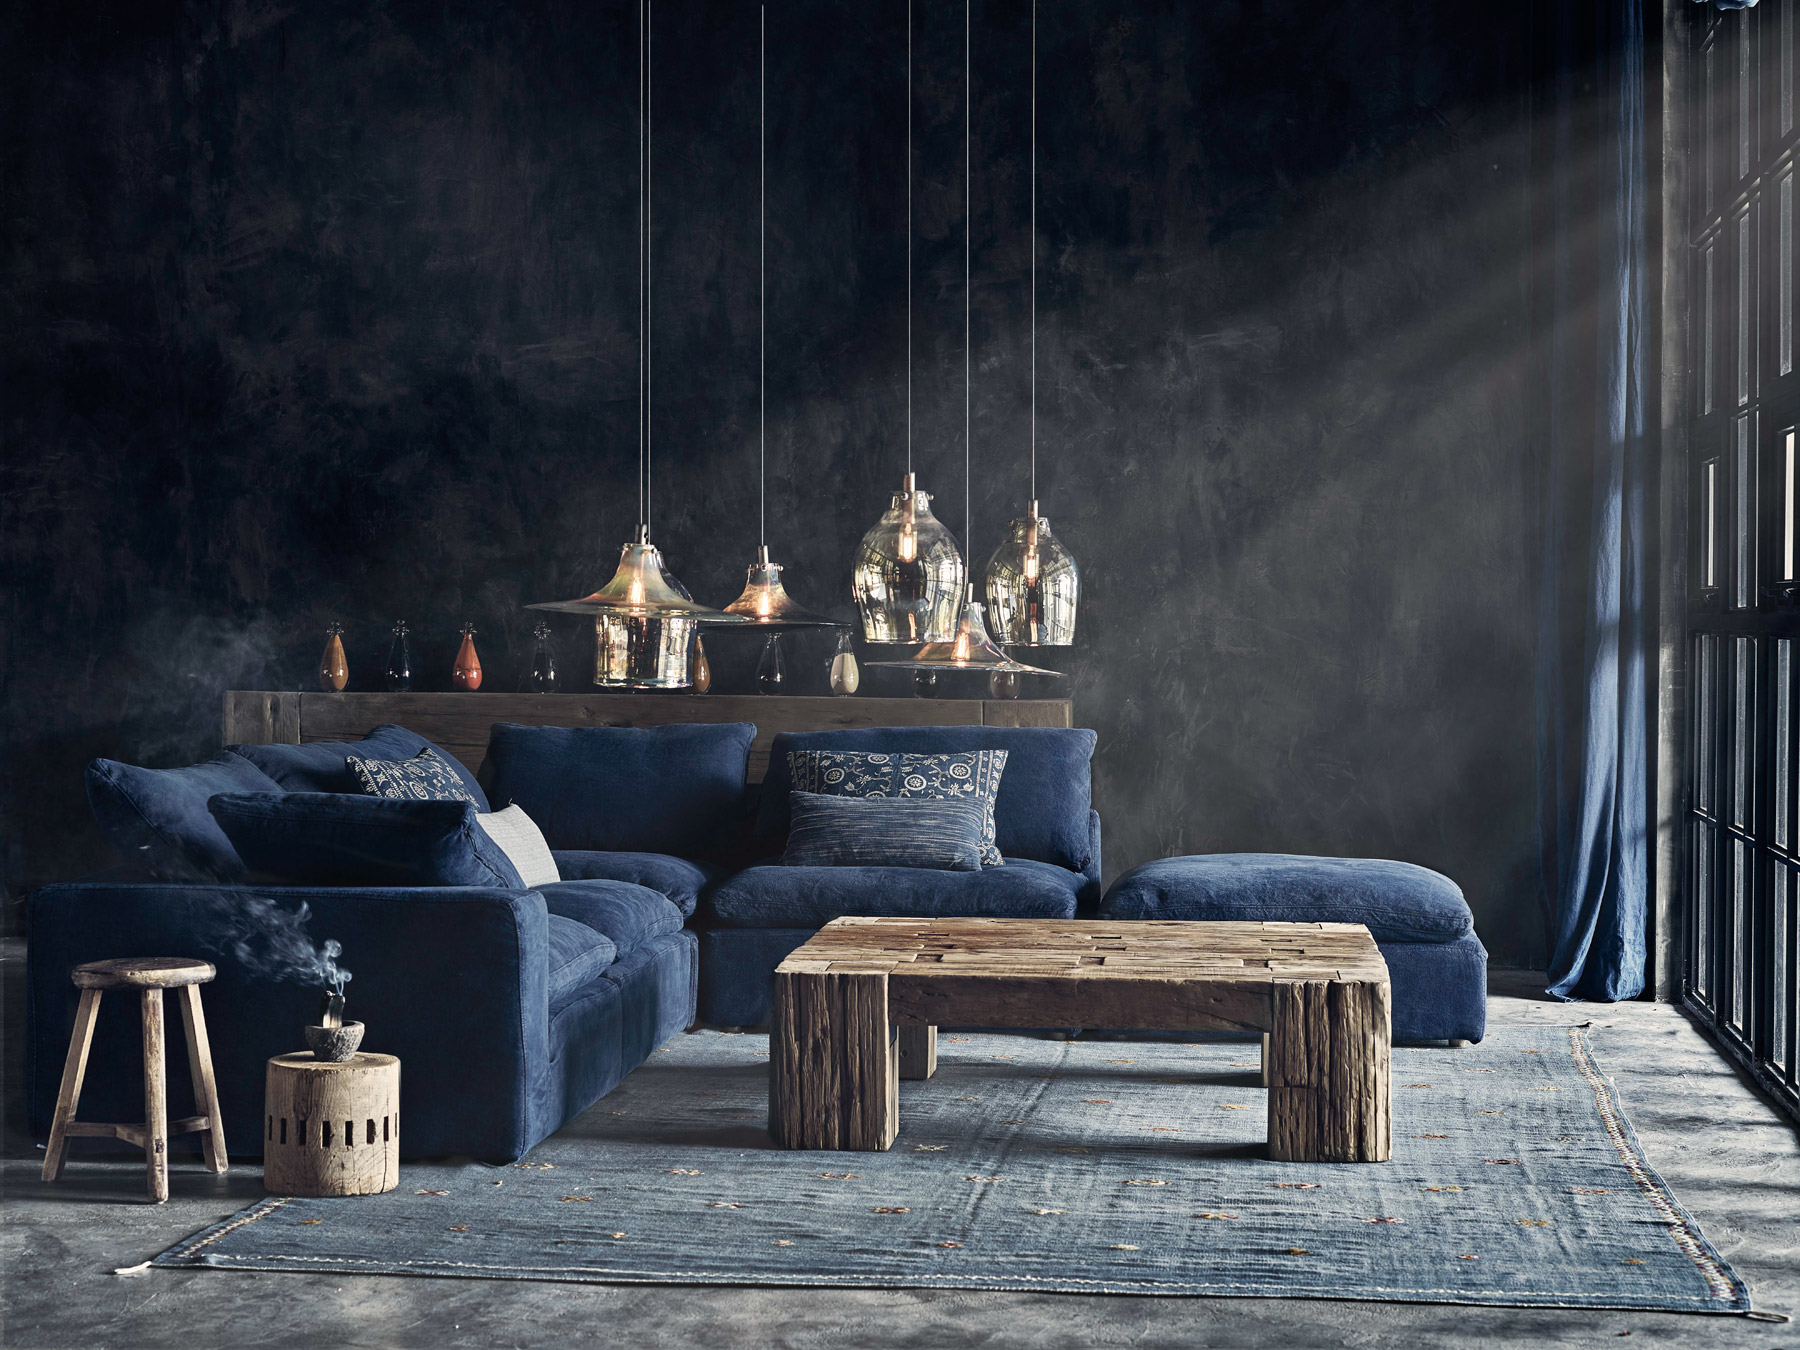 5 of our favourite designs from Timothy Oulton’s plush, new Noble Souls collection